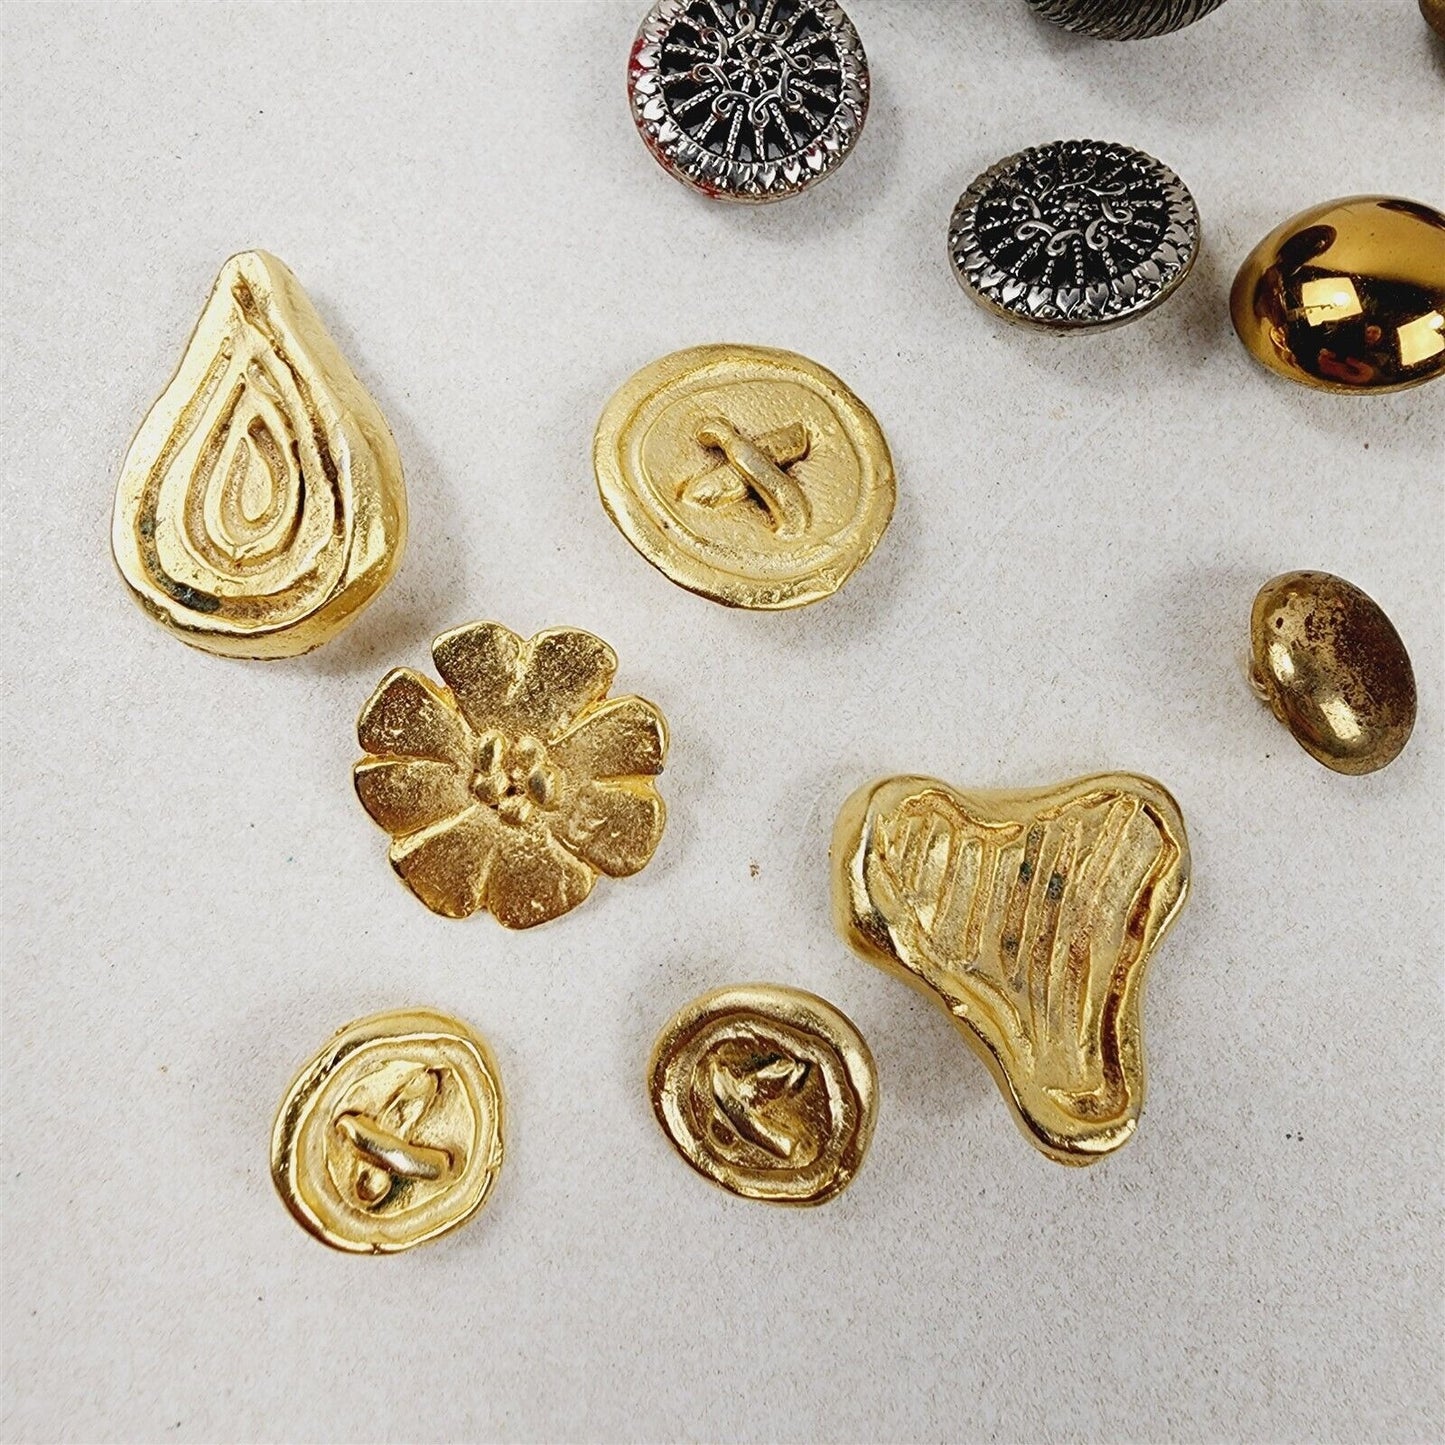 Lot of 19 Vintage Metal Buttons Brass Aluminum Gold & Silver Tone